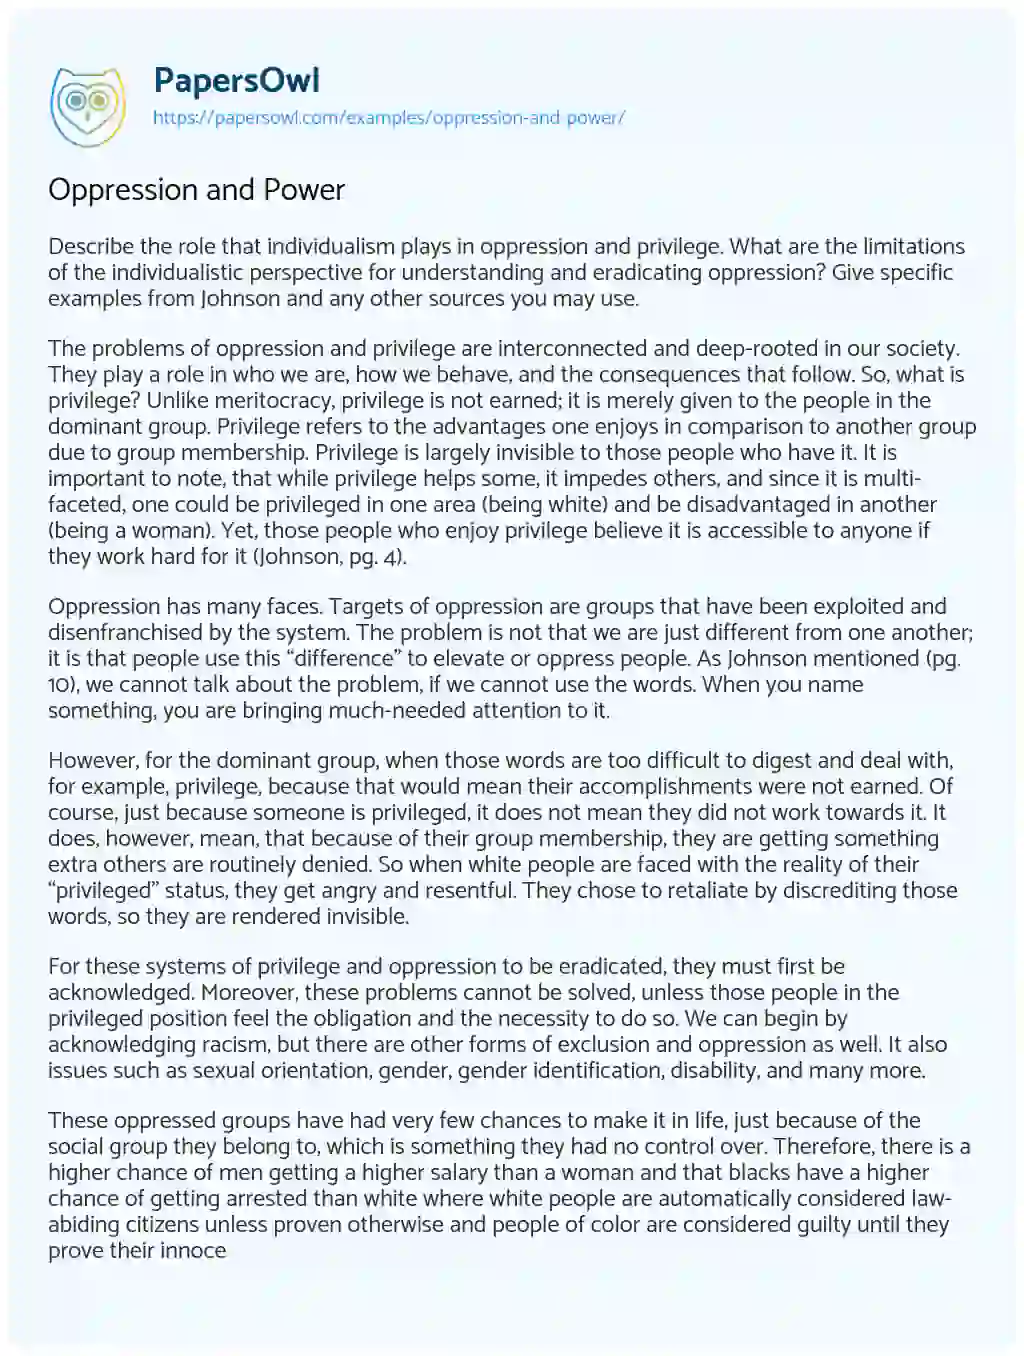 Essay on Oppression and Power